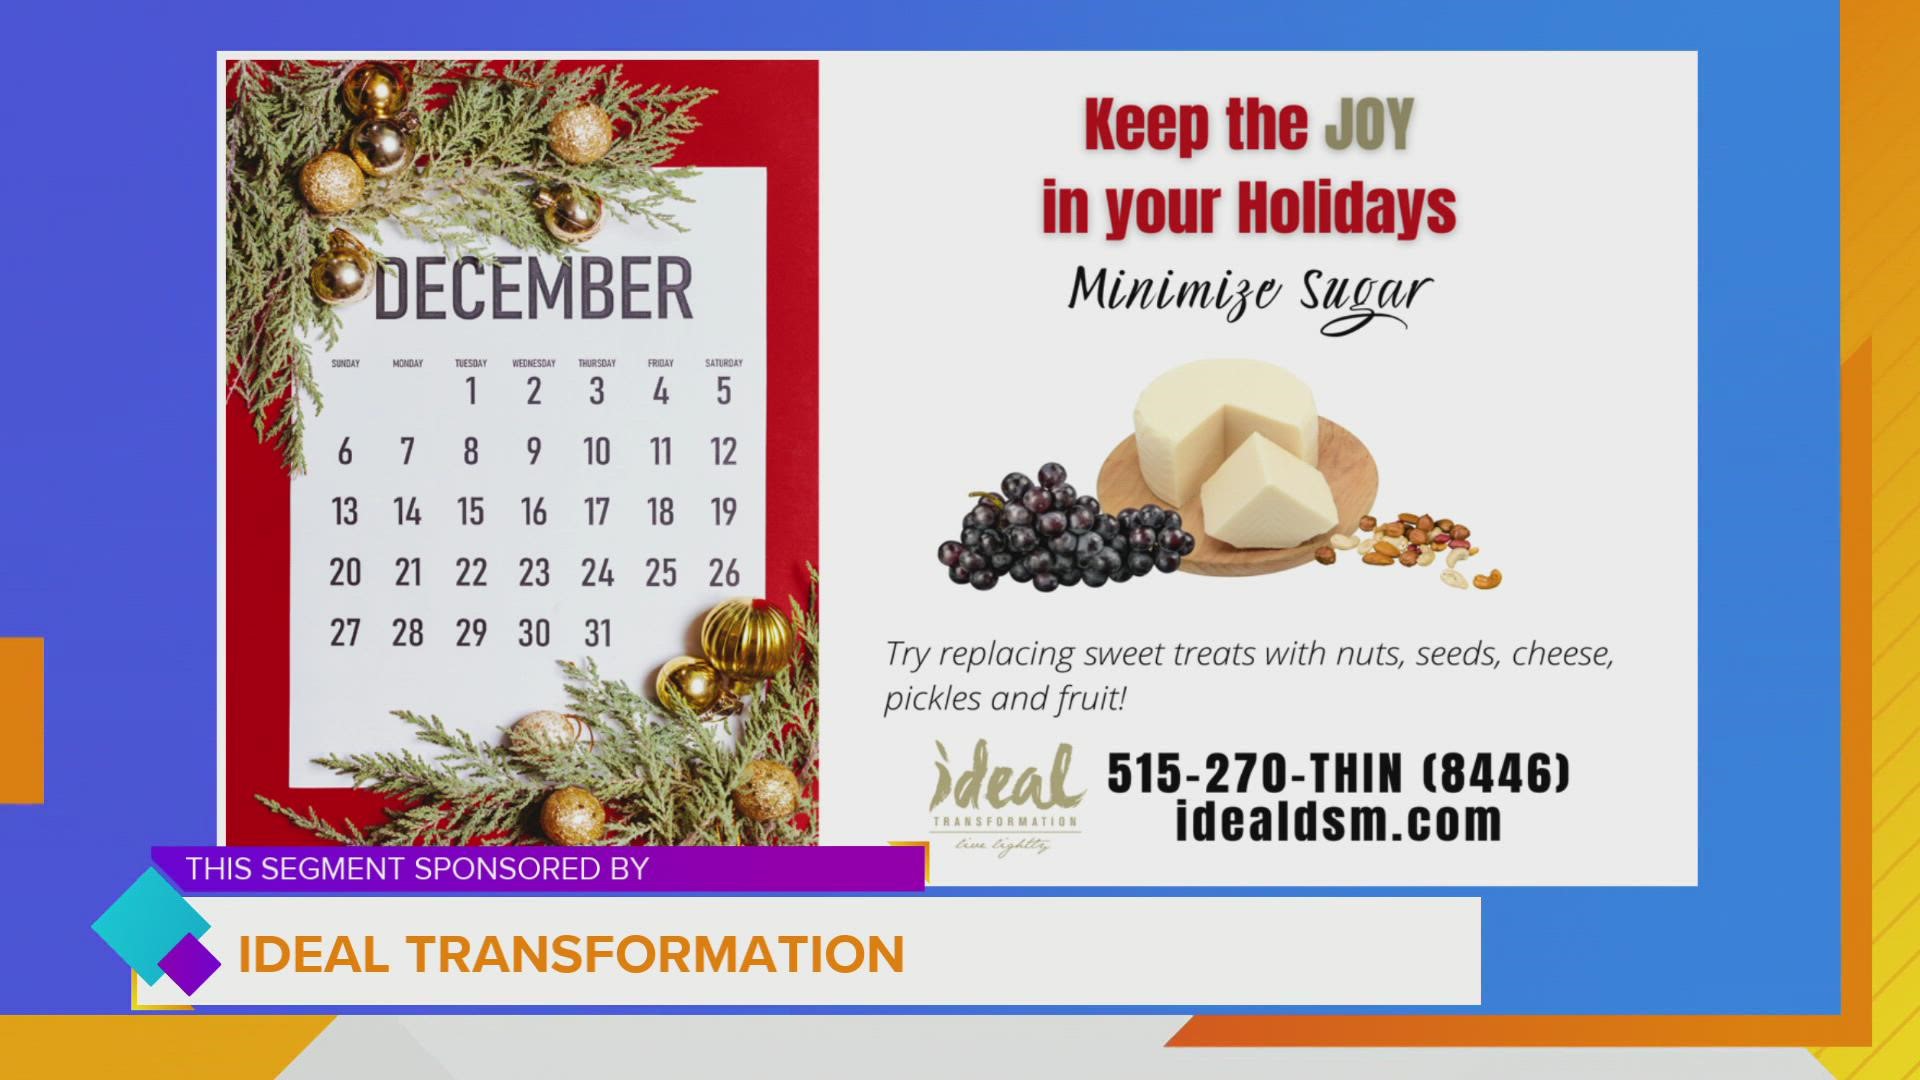 Diana Brown, Ideal Transformation, with 3 things you can do during the holidays to help keep you on track/feel good and how to make a plan for 2022 | Paid Content